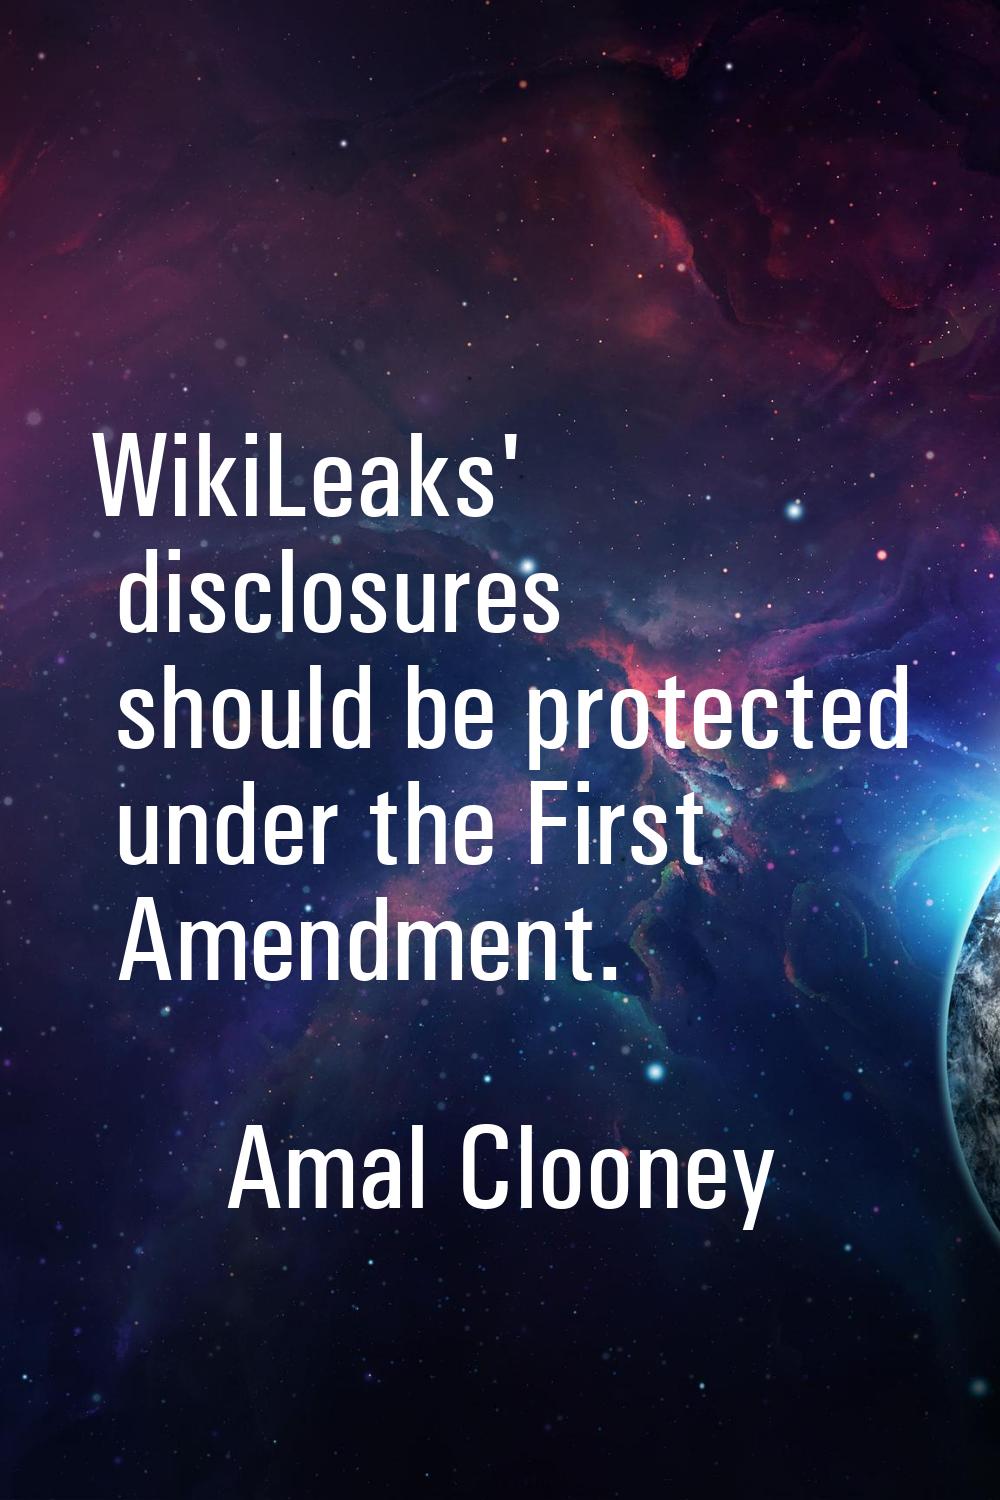 WikiLeaks' disclosures should be protected under the First Amendment.